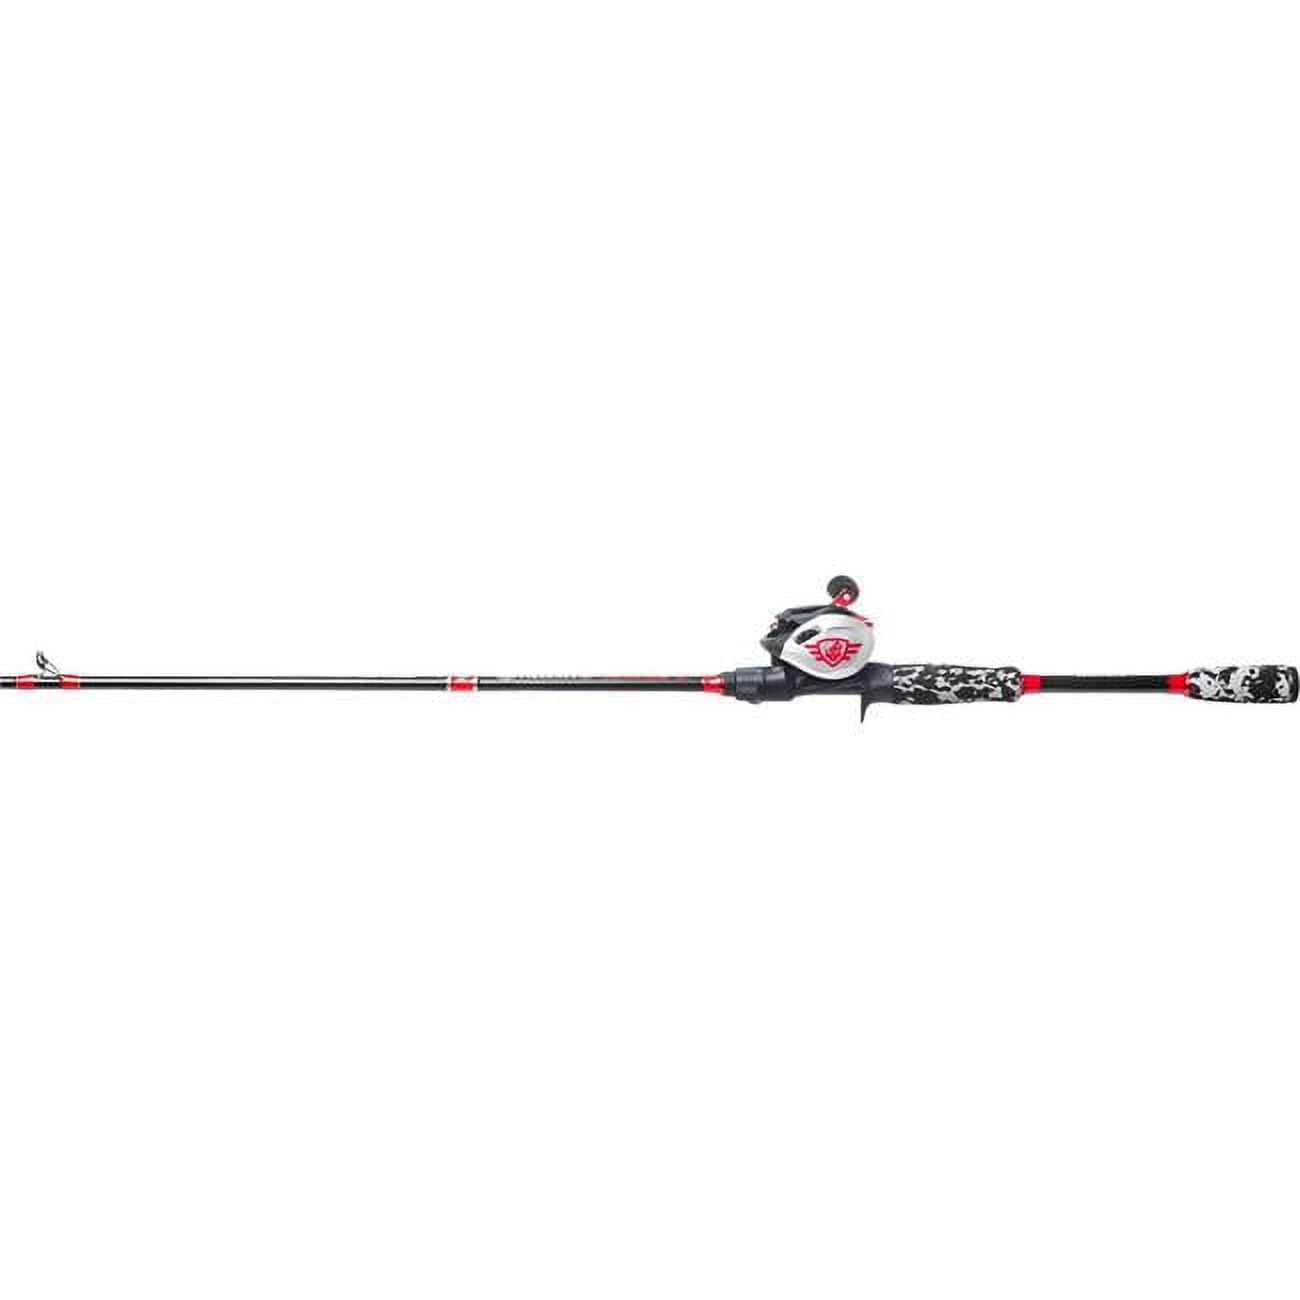 Favorite Fishing 7 ft. 2 Piece Army Right Hand Casting Rod & Reel Combo 